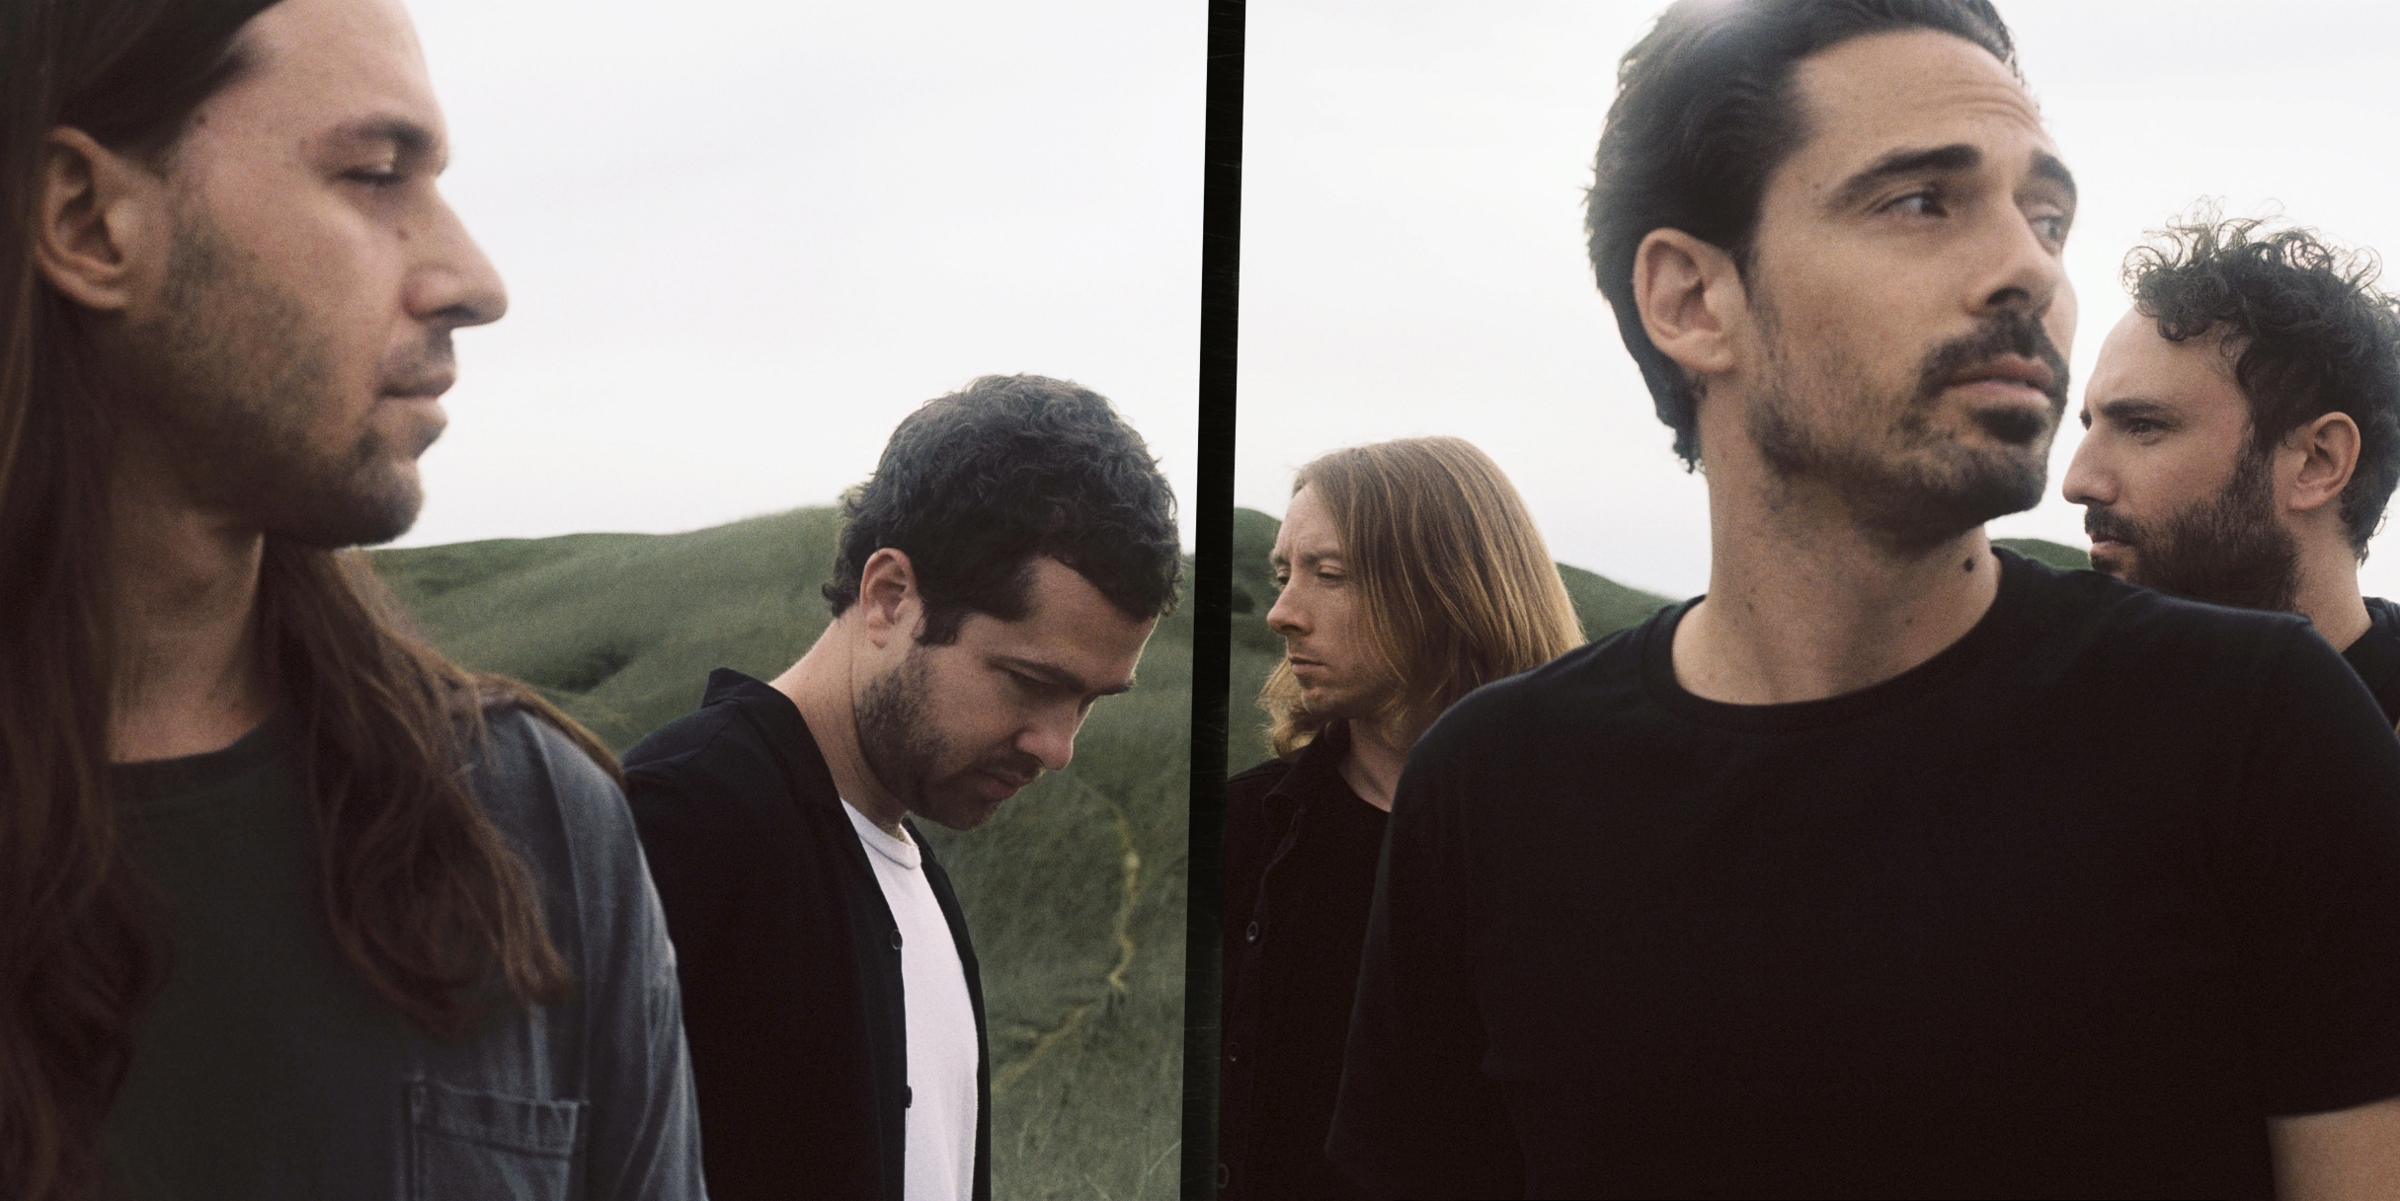 Local Natives spin pure chaos cacophony into dreamy indie rock